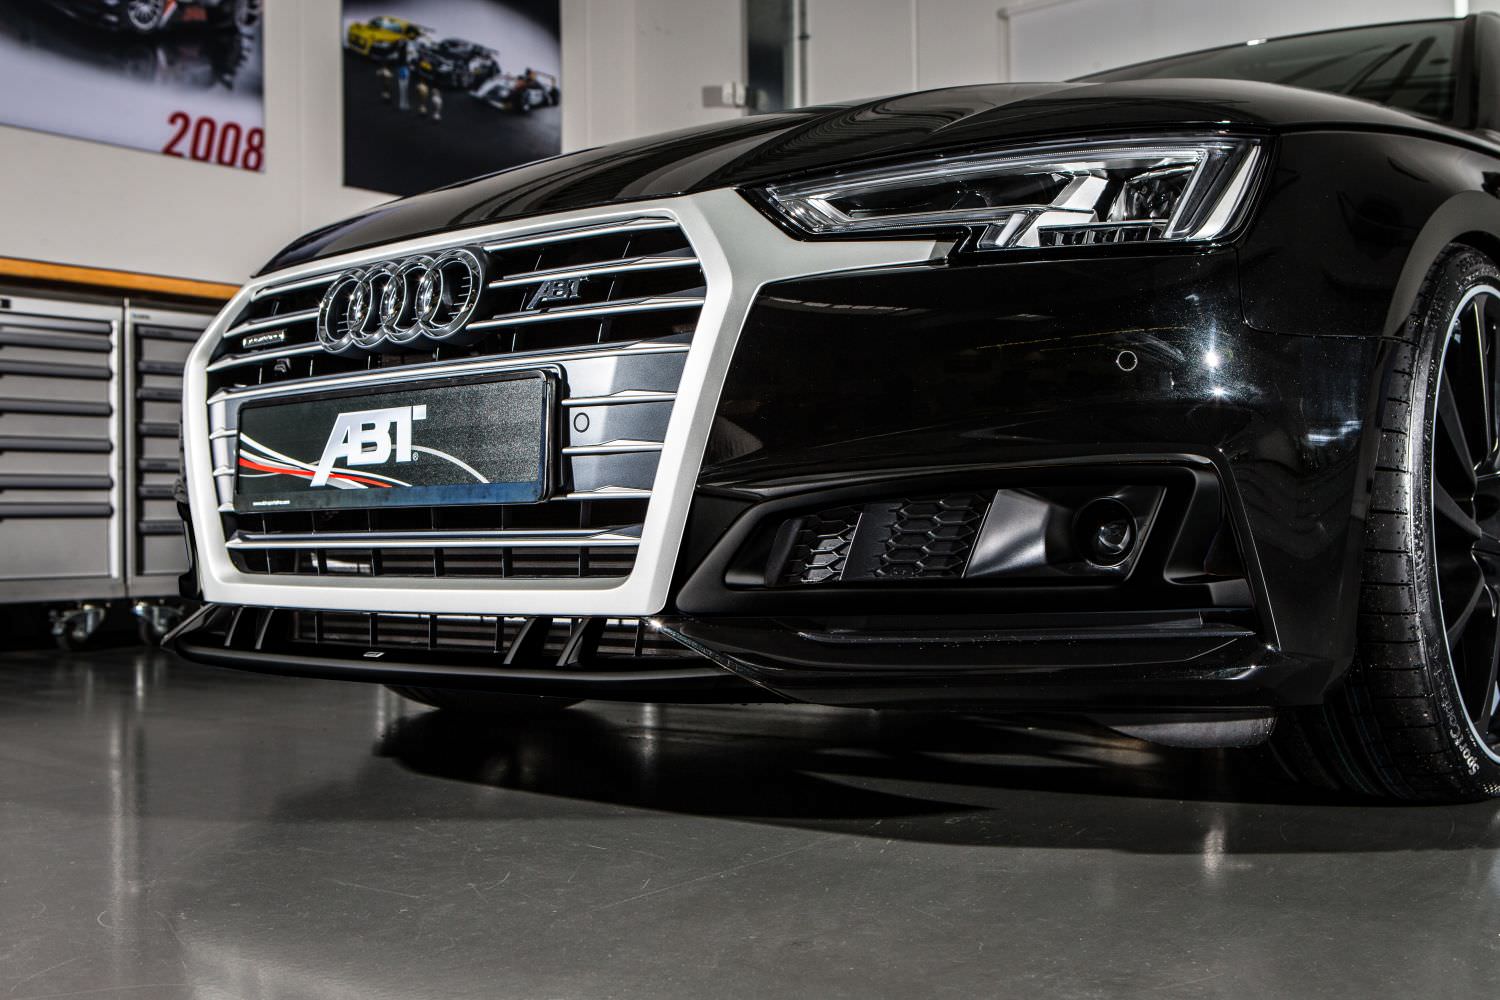 AUDI A4 audi-a4-b9-1-4-tfsi-s4-abt-tuning Used - the parking